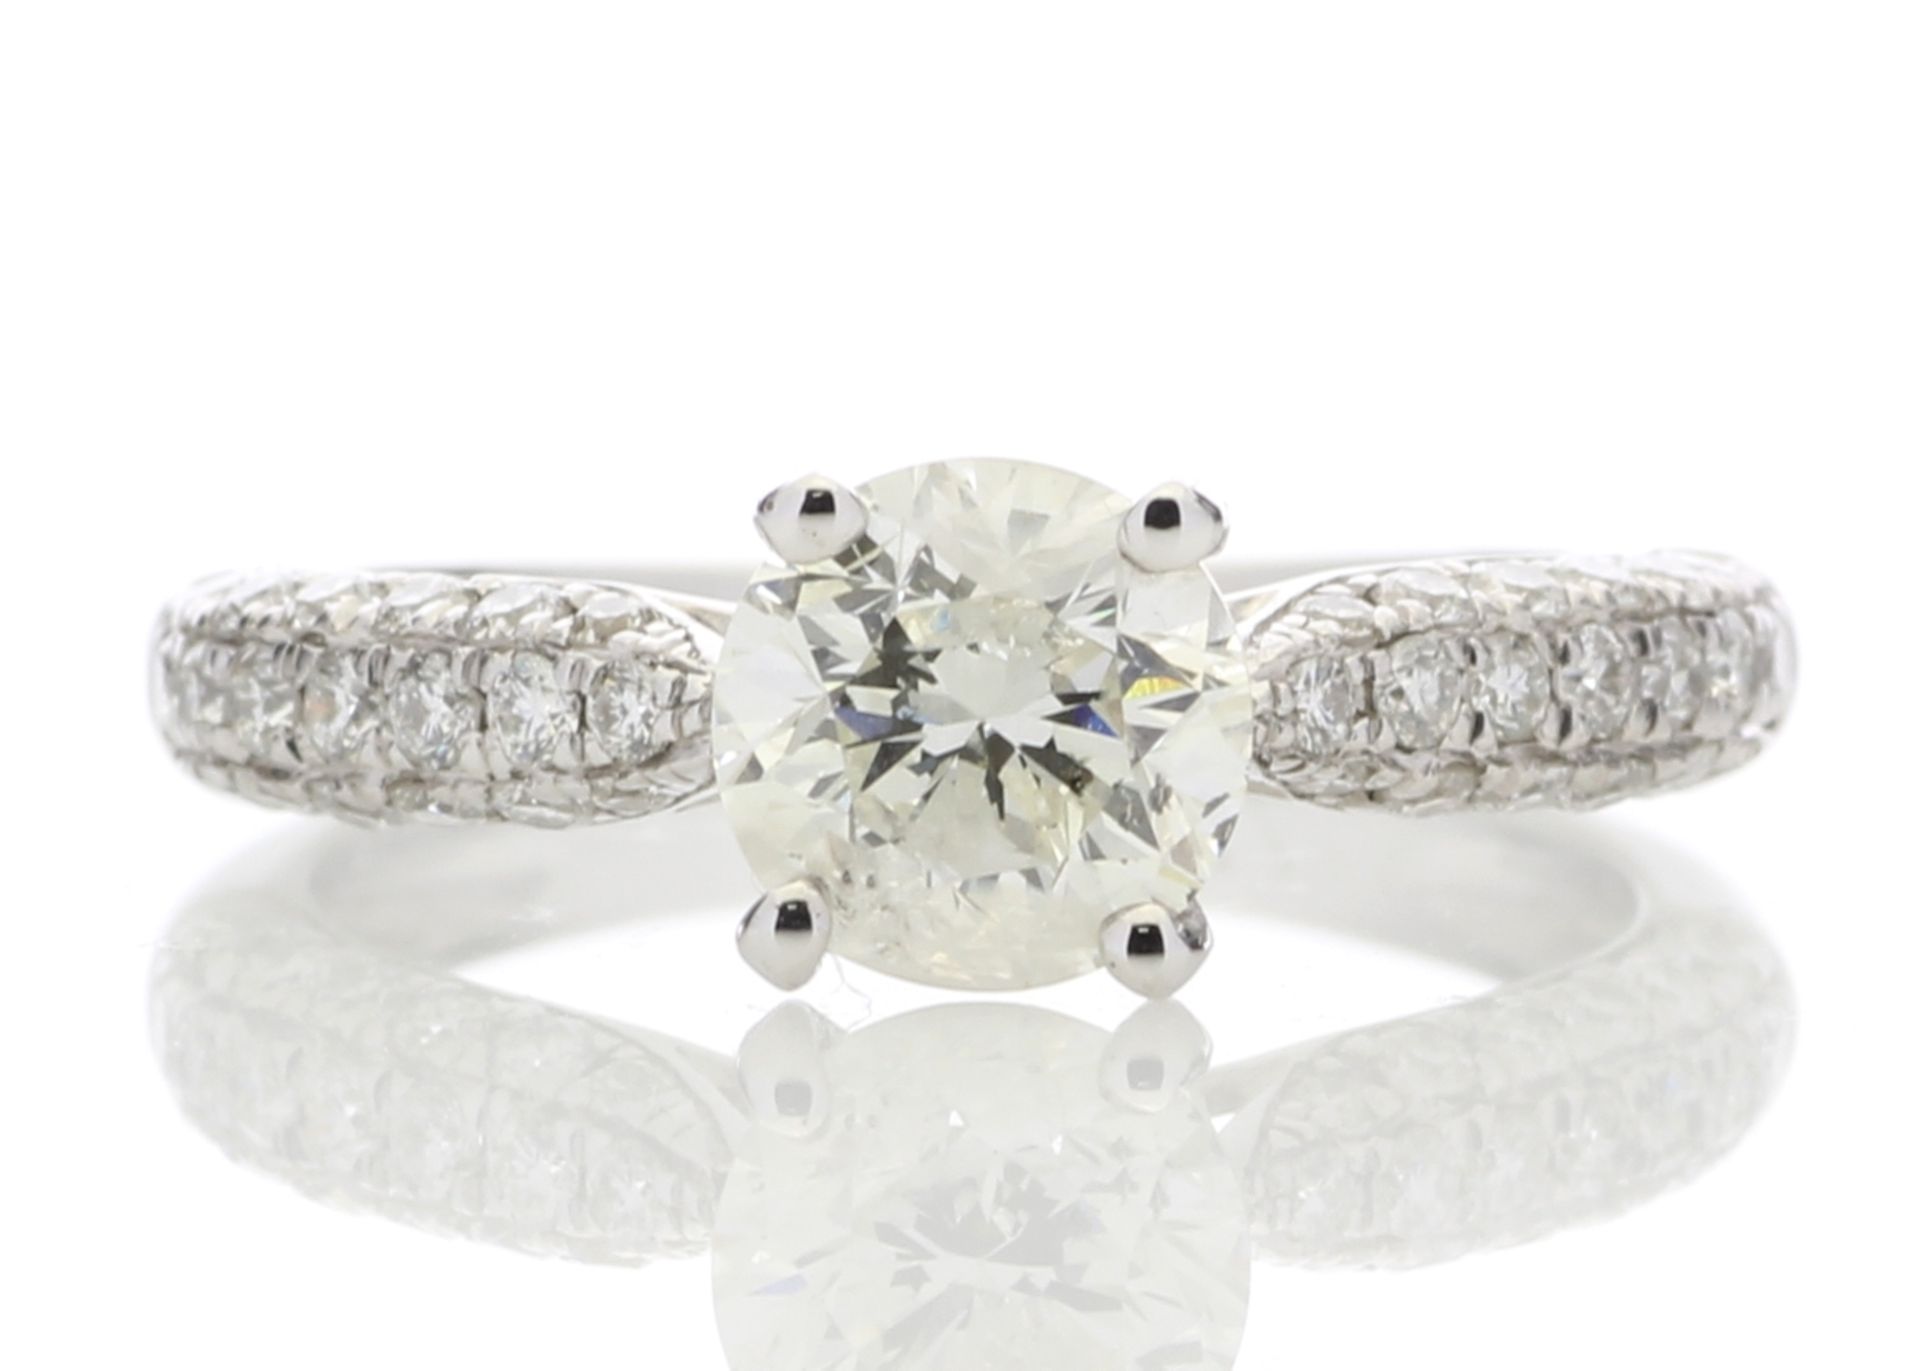 18ct White Gold Diamond Ring With Stone Set Shoulders 1.38 Carats - Valued By GIE £27,950.00 - A